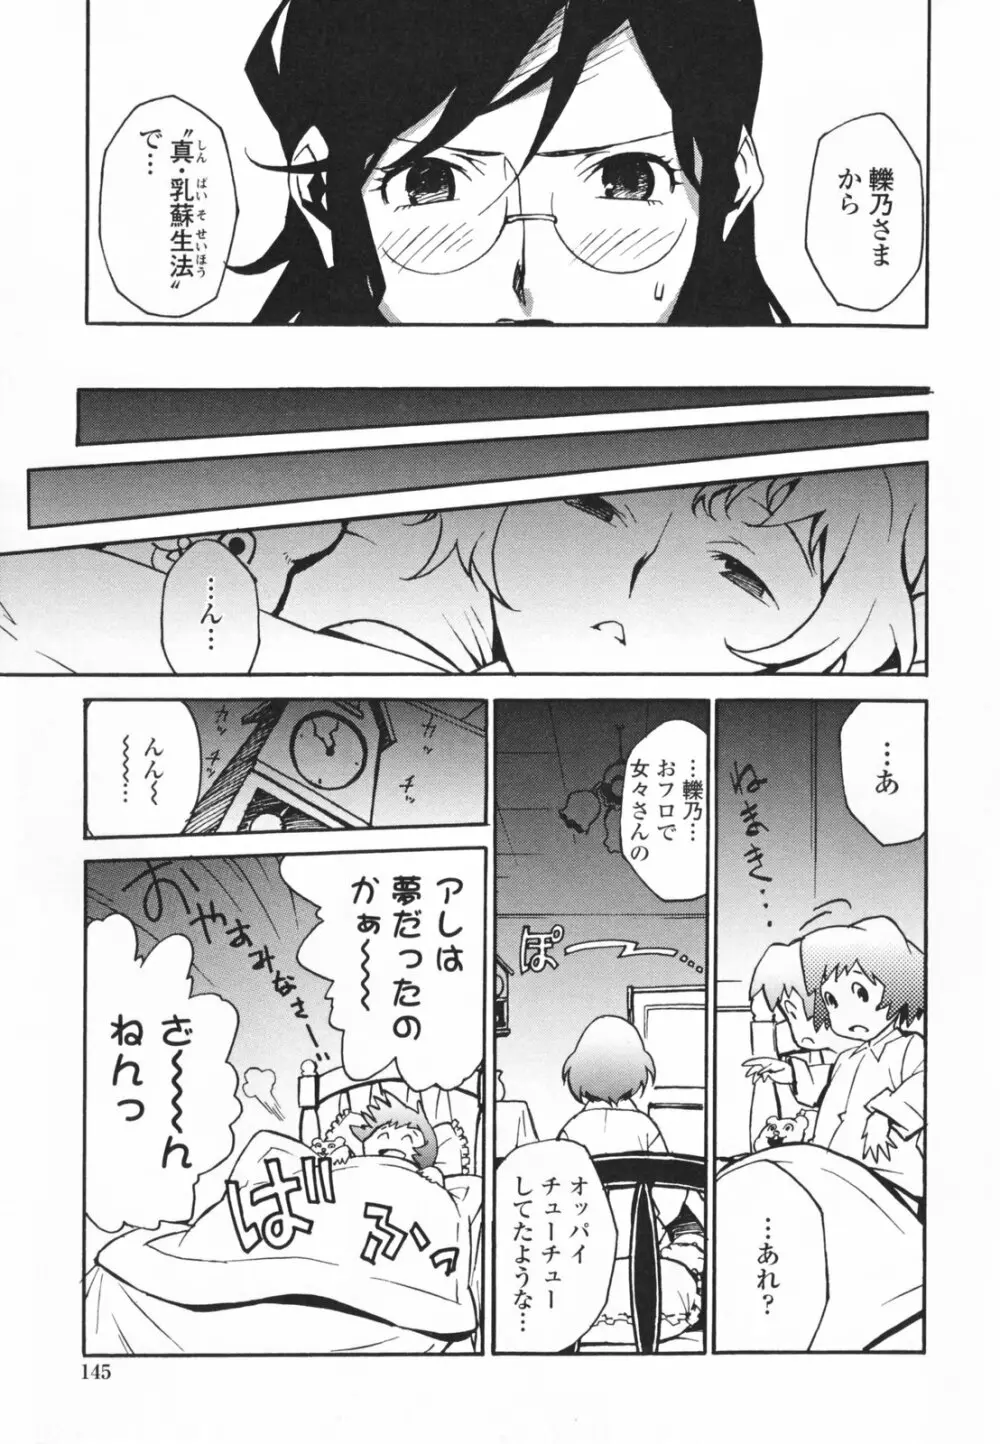 TOP LESS 淫女之宴 Page.149